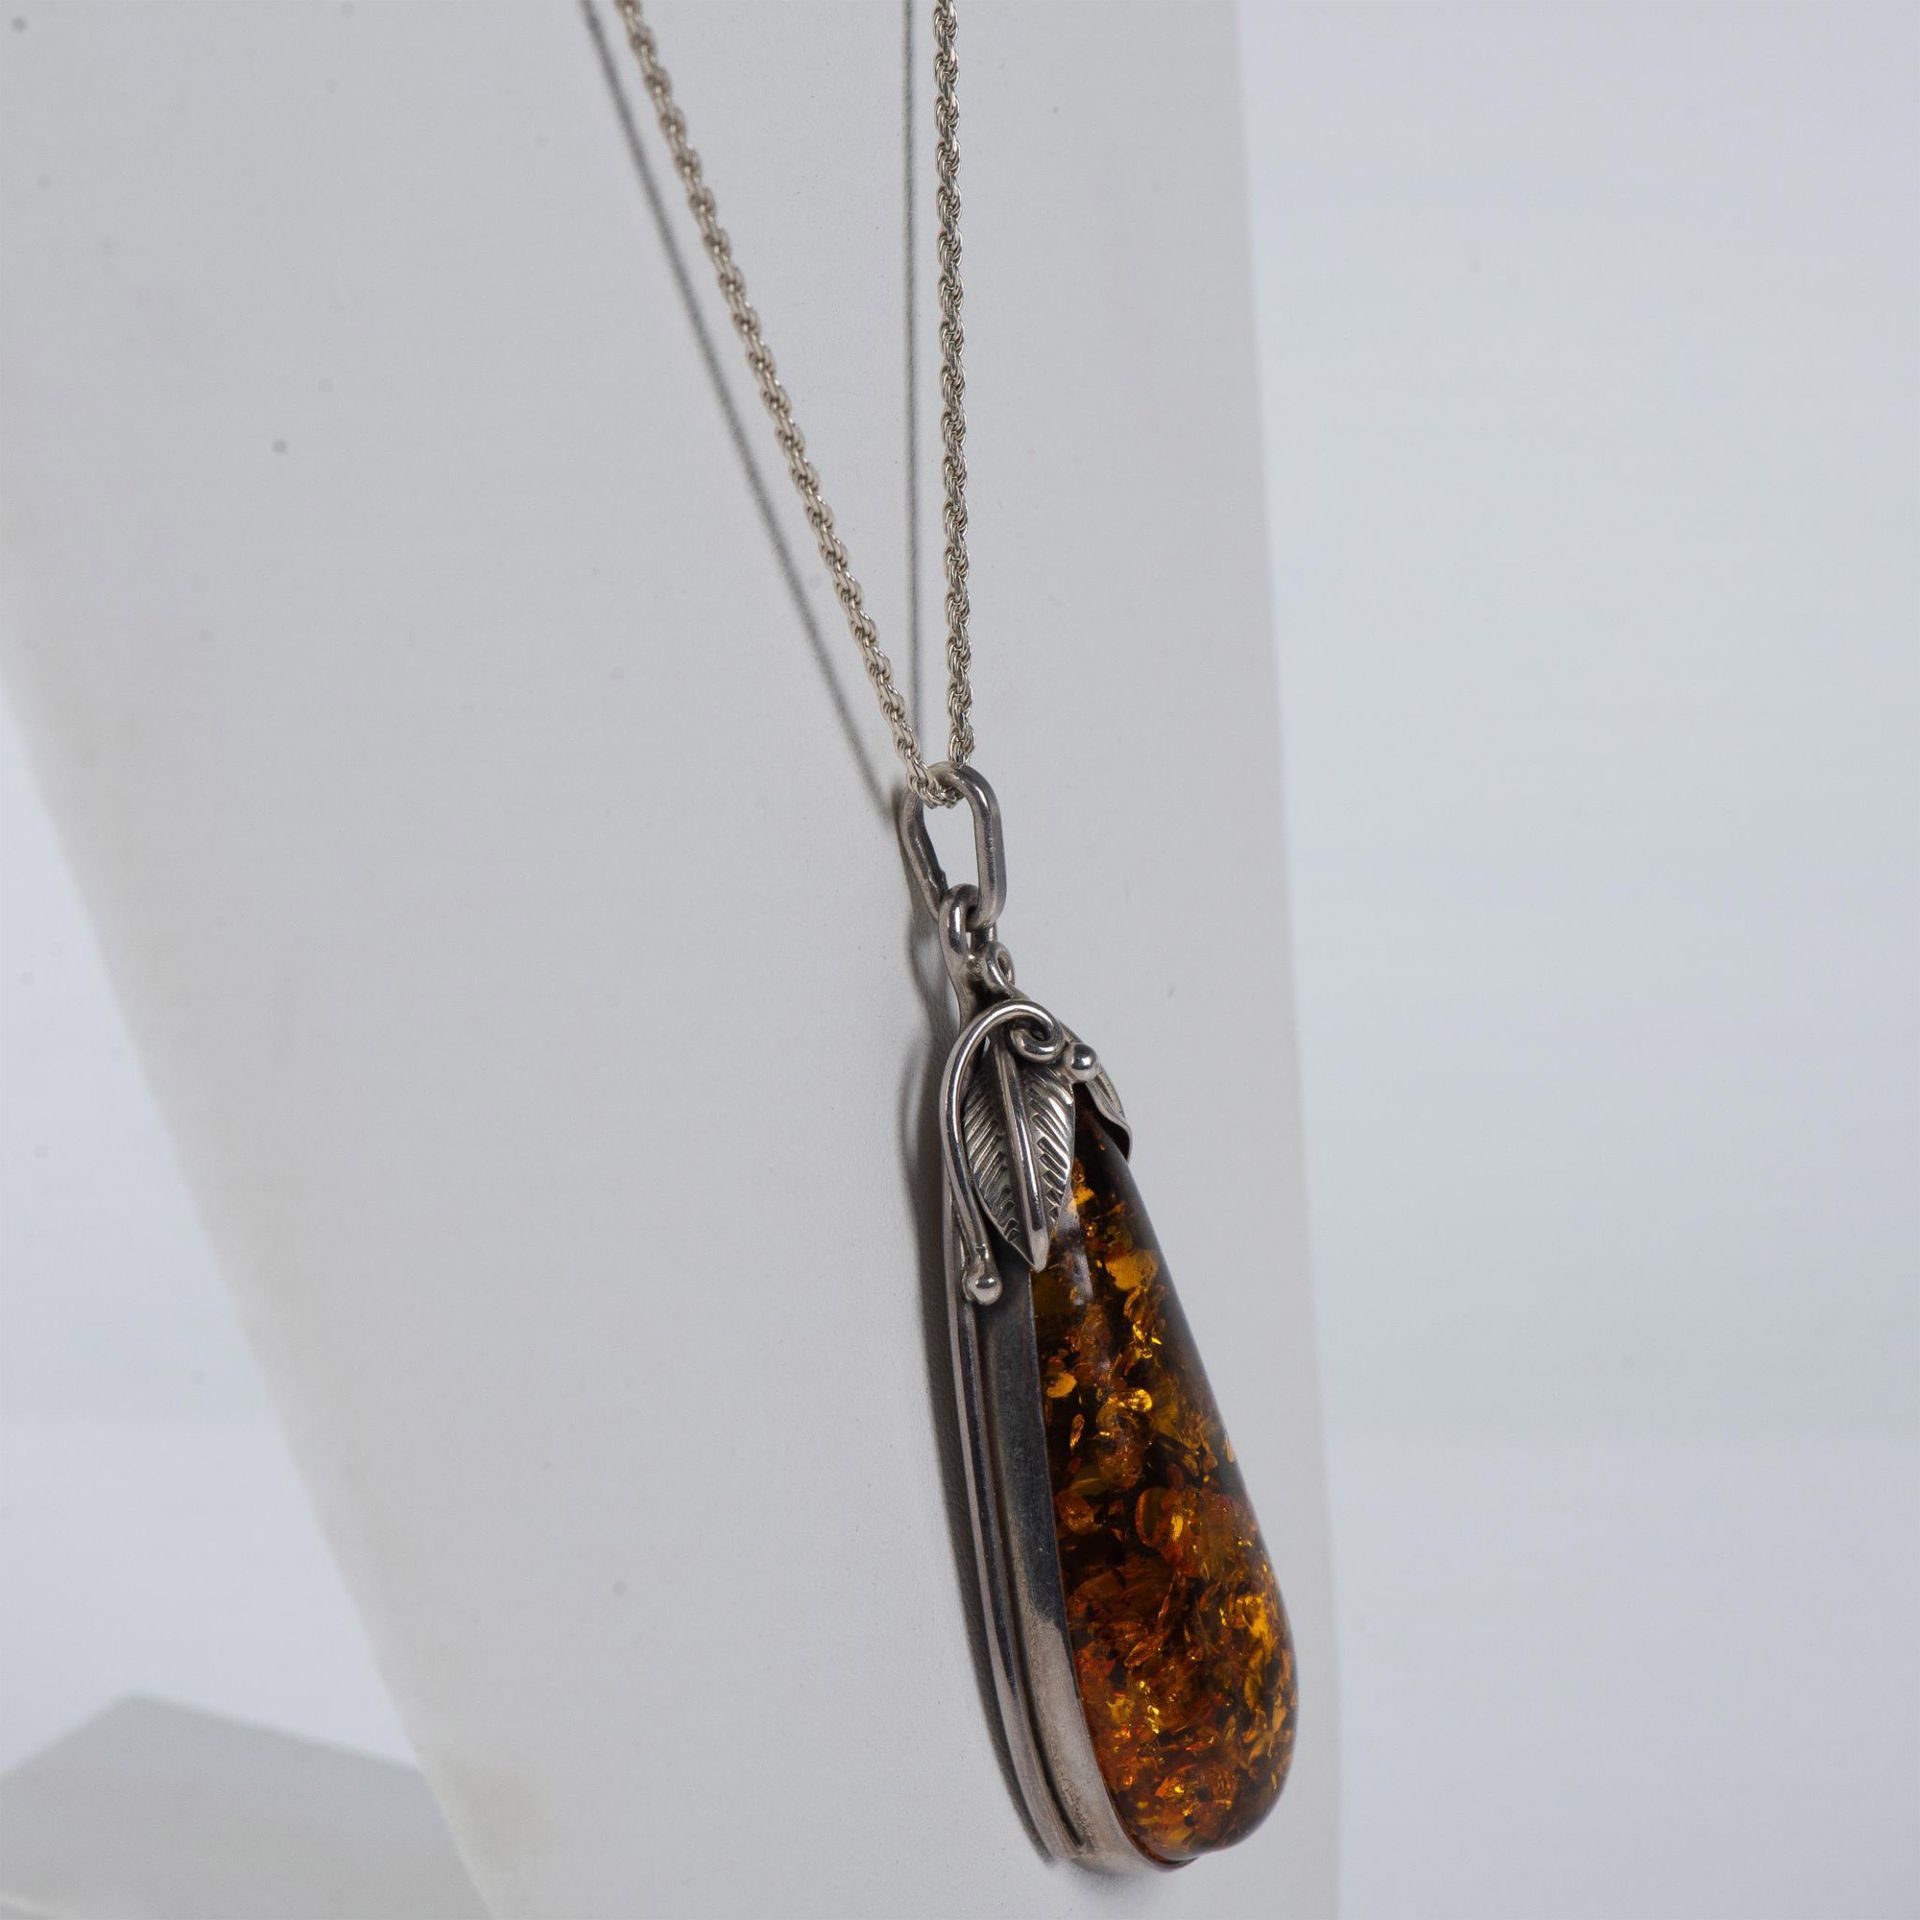 Gorgeous Sterling Silver and Amber Necklace and Ring - Image 9 of 10